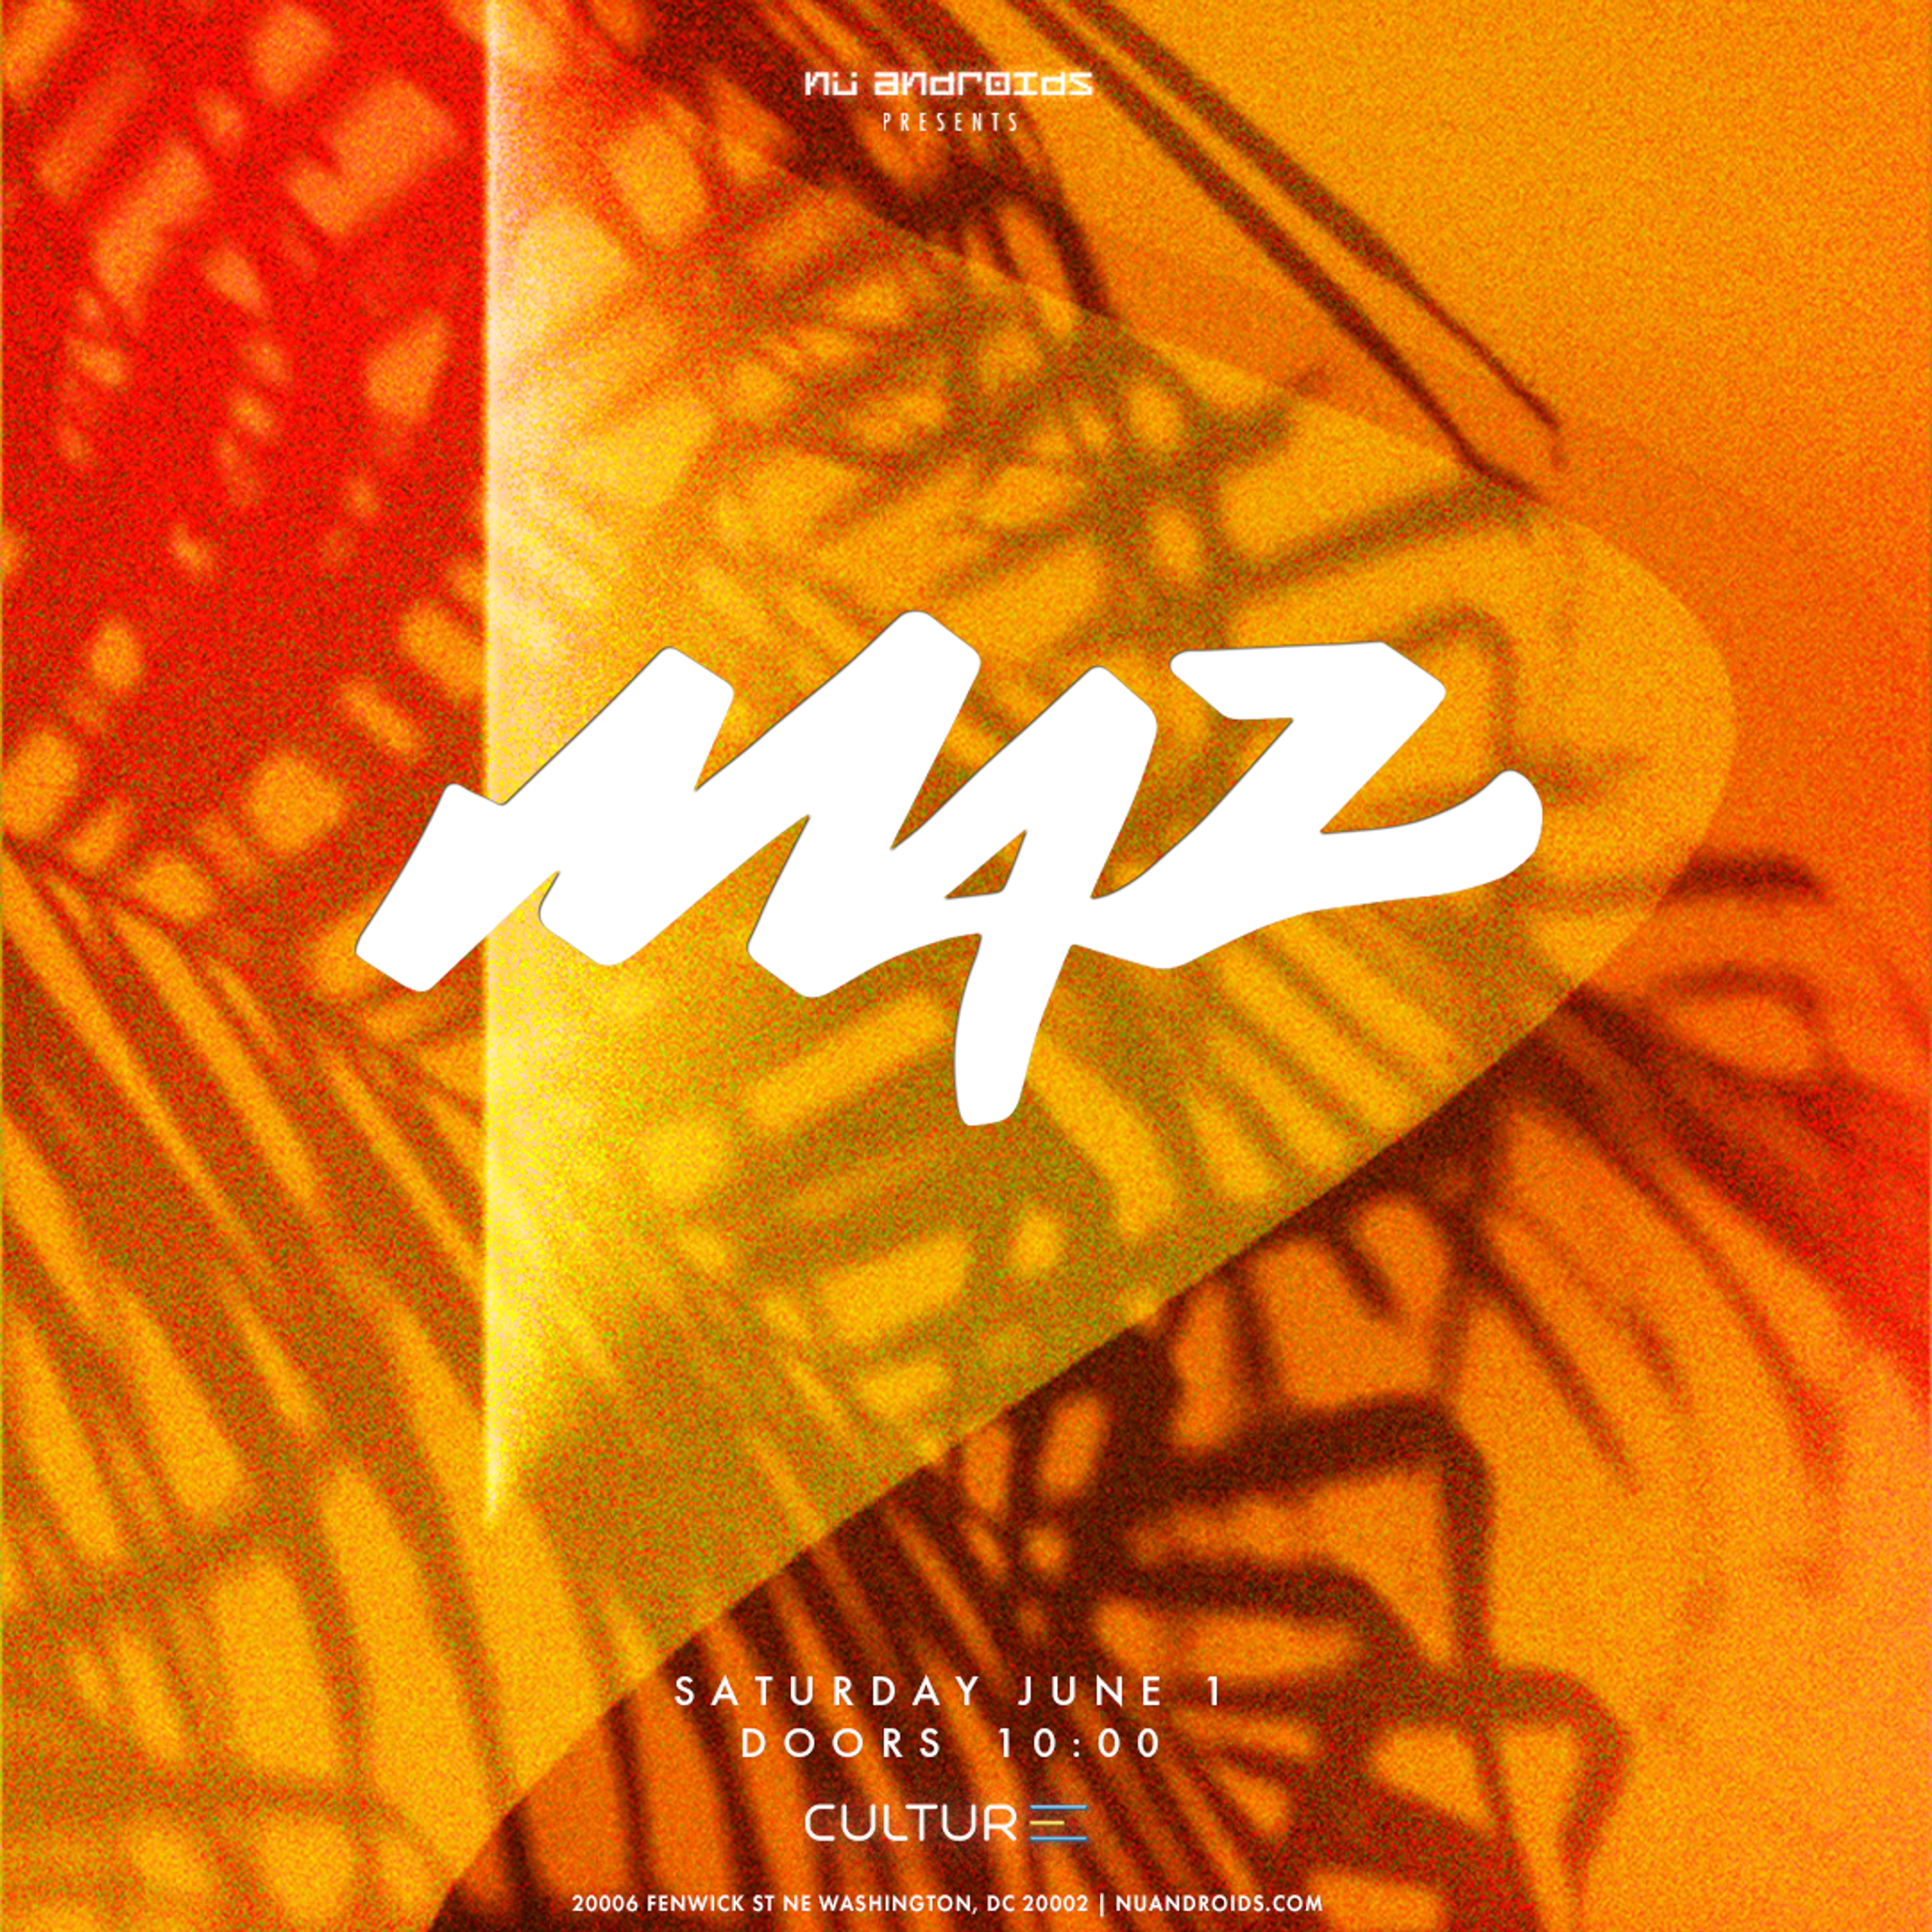 Flyer image for Maz